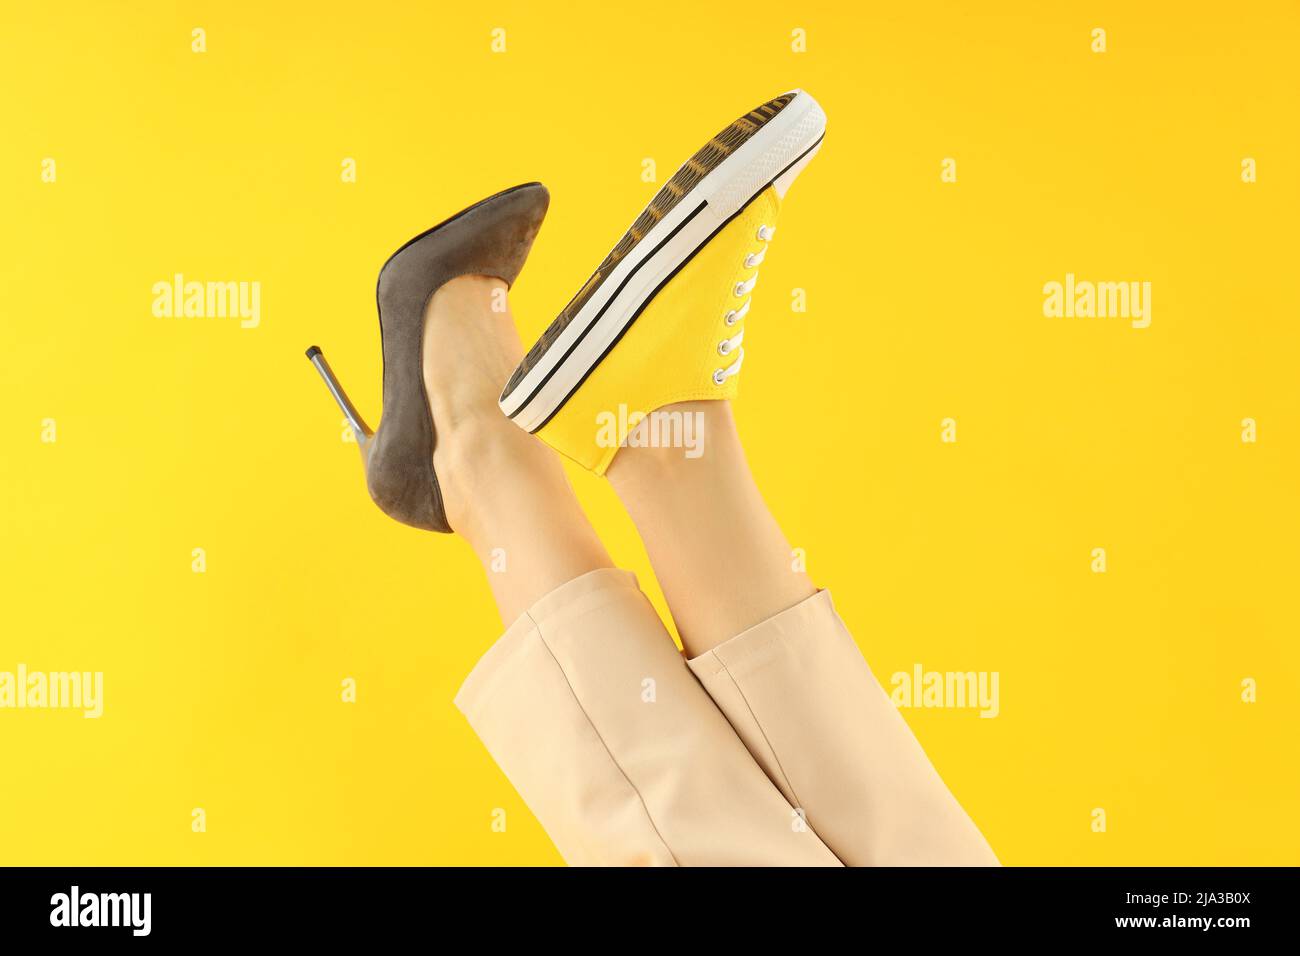 Female legs in heel and sneaker on yellow background Stock Photo